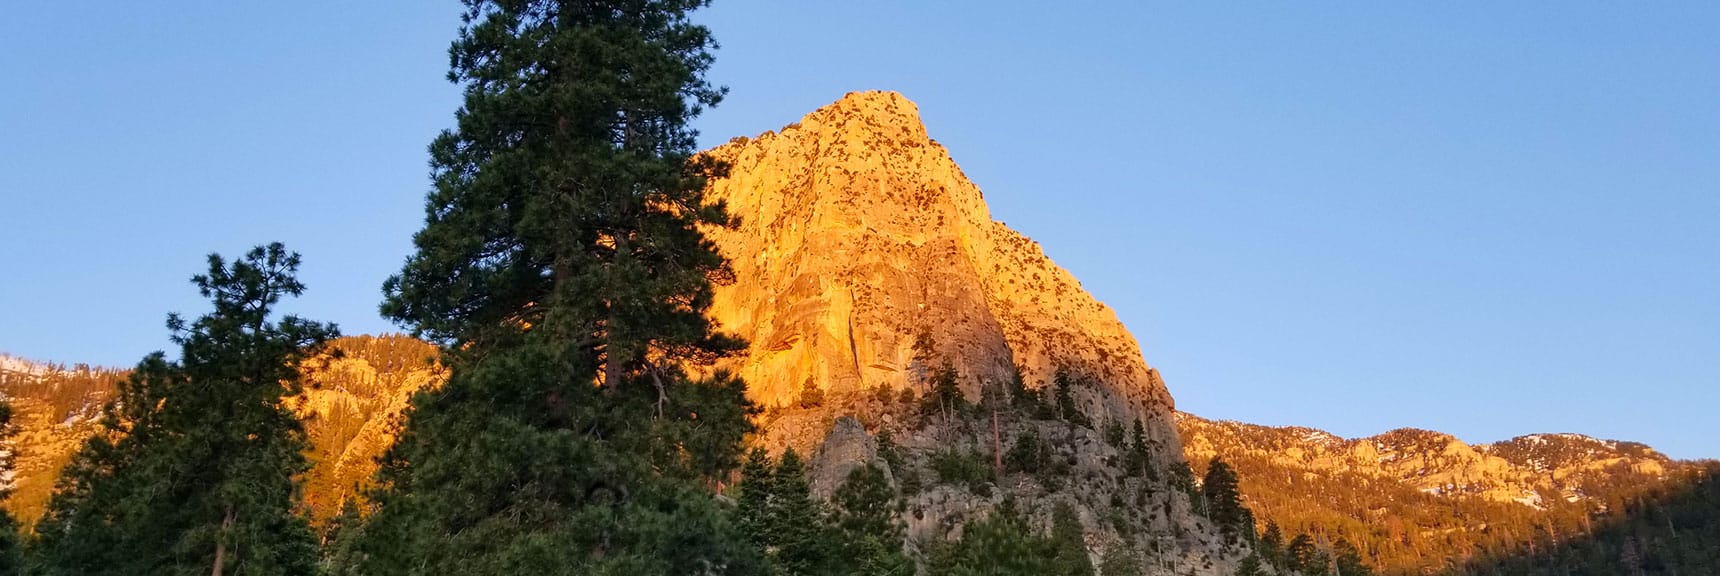 Cathedral Rock Viewed from South Climb Trailhead in Mt. Charleston Wilderness, Nevada